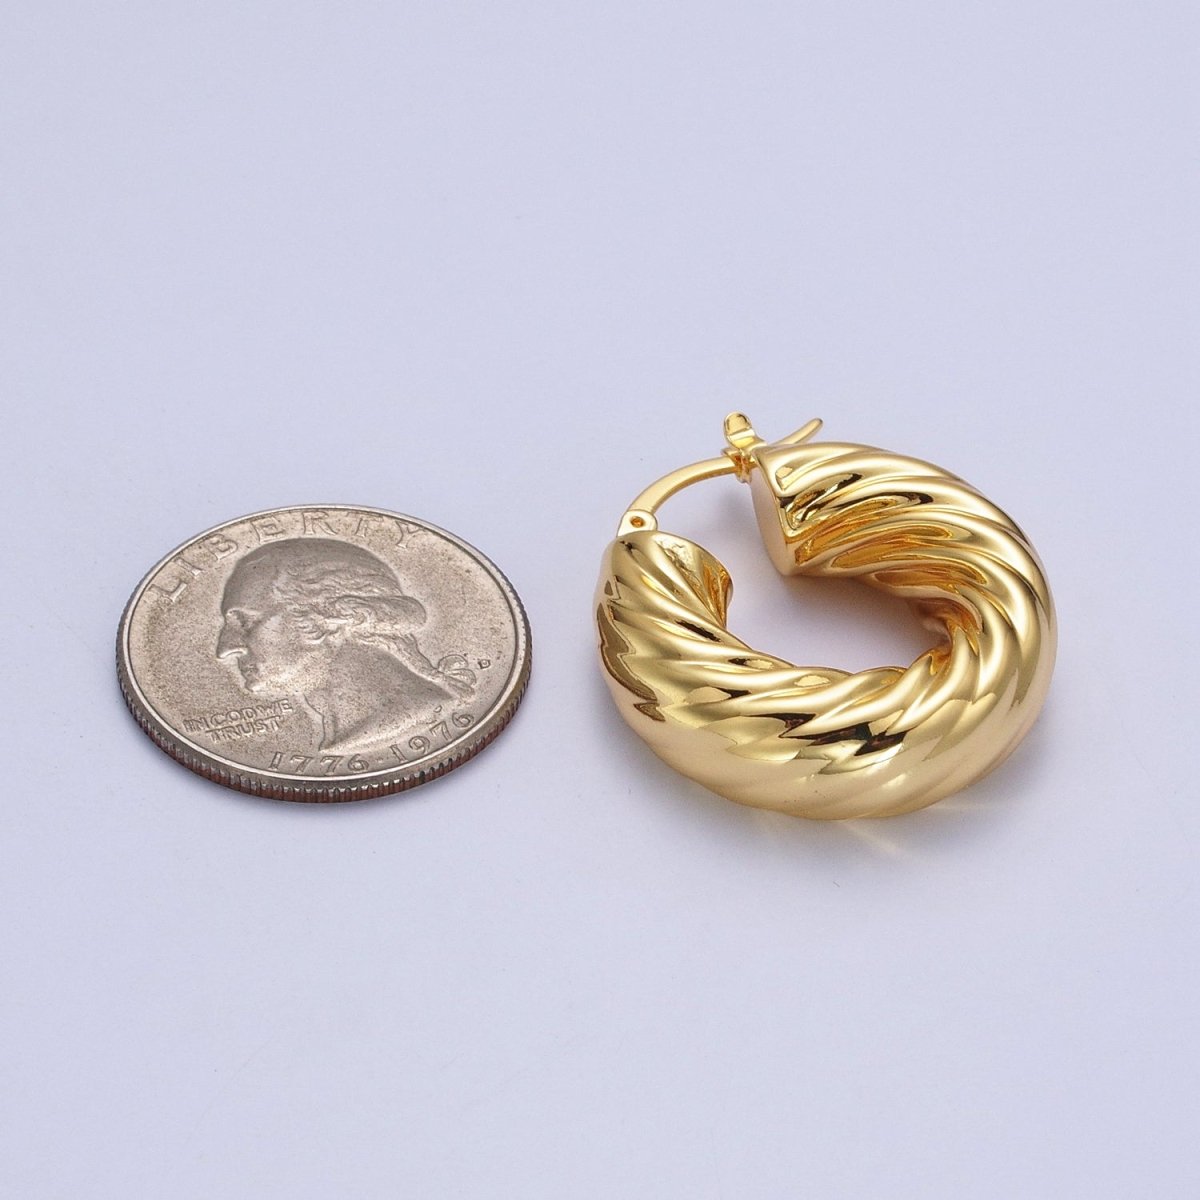 30mm Chubby Twisted Croissant French Lock Latch Earrings in Gold & Silver | AB144 AB145 - DLUXCA